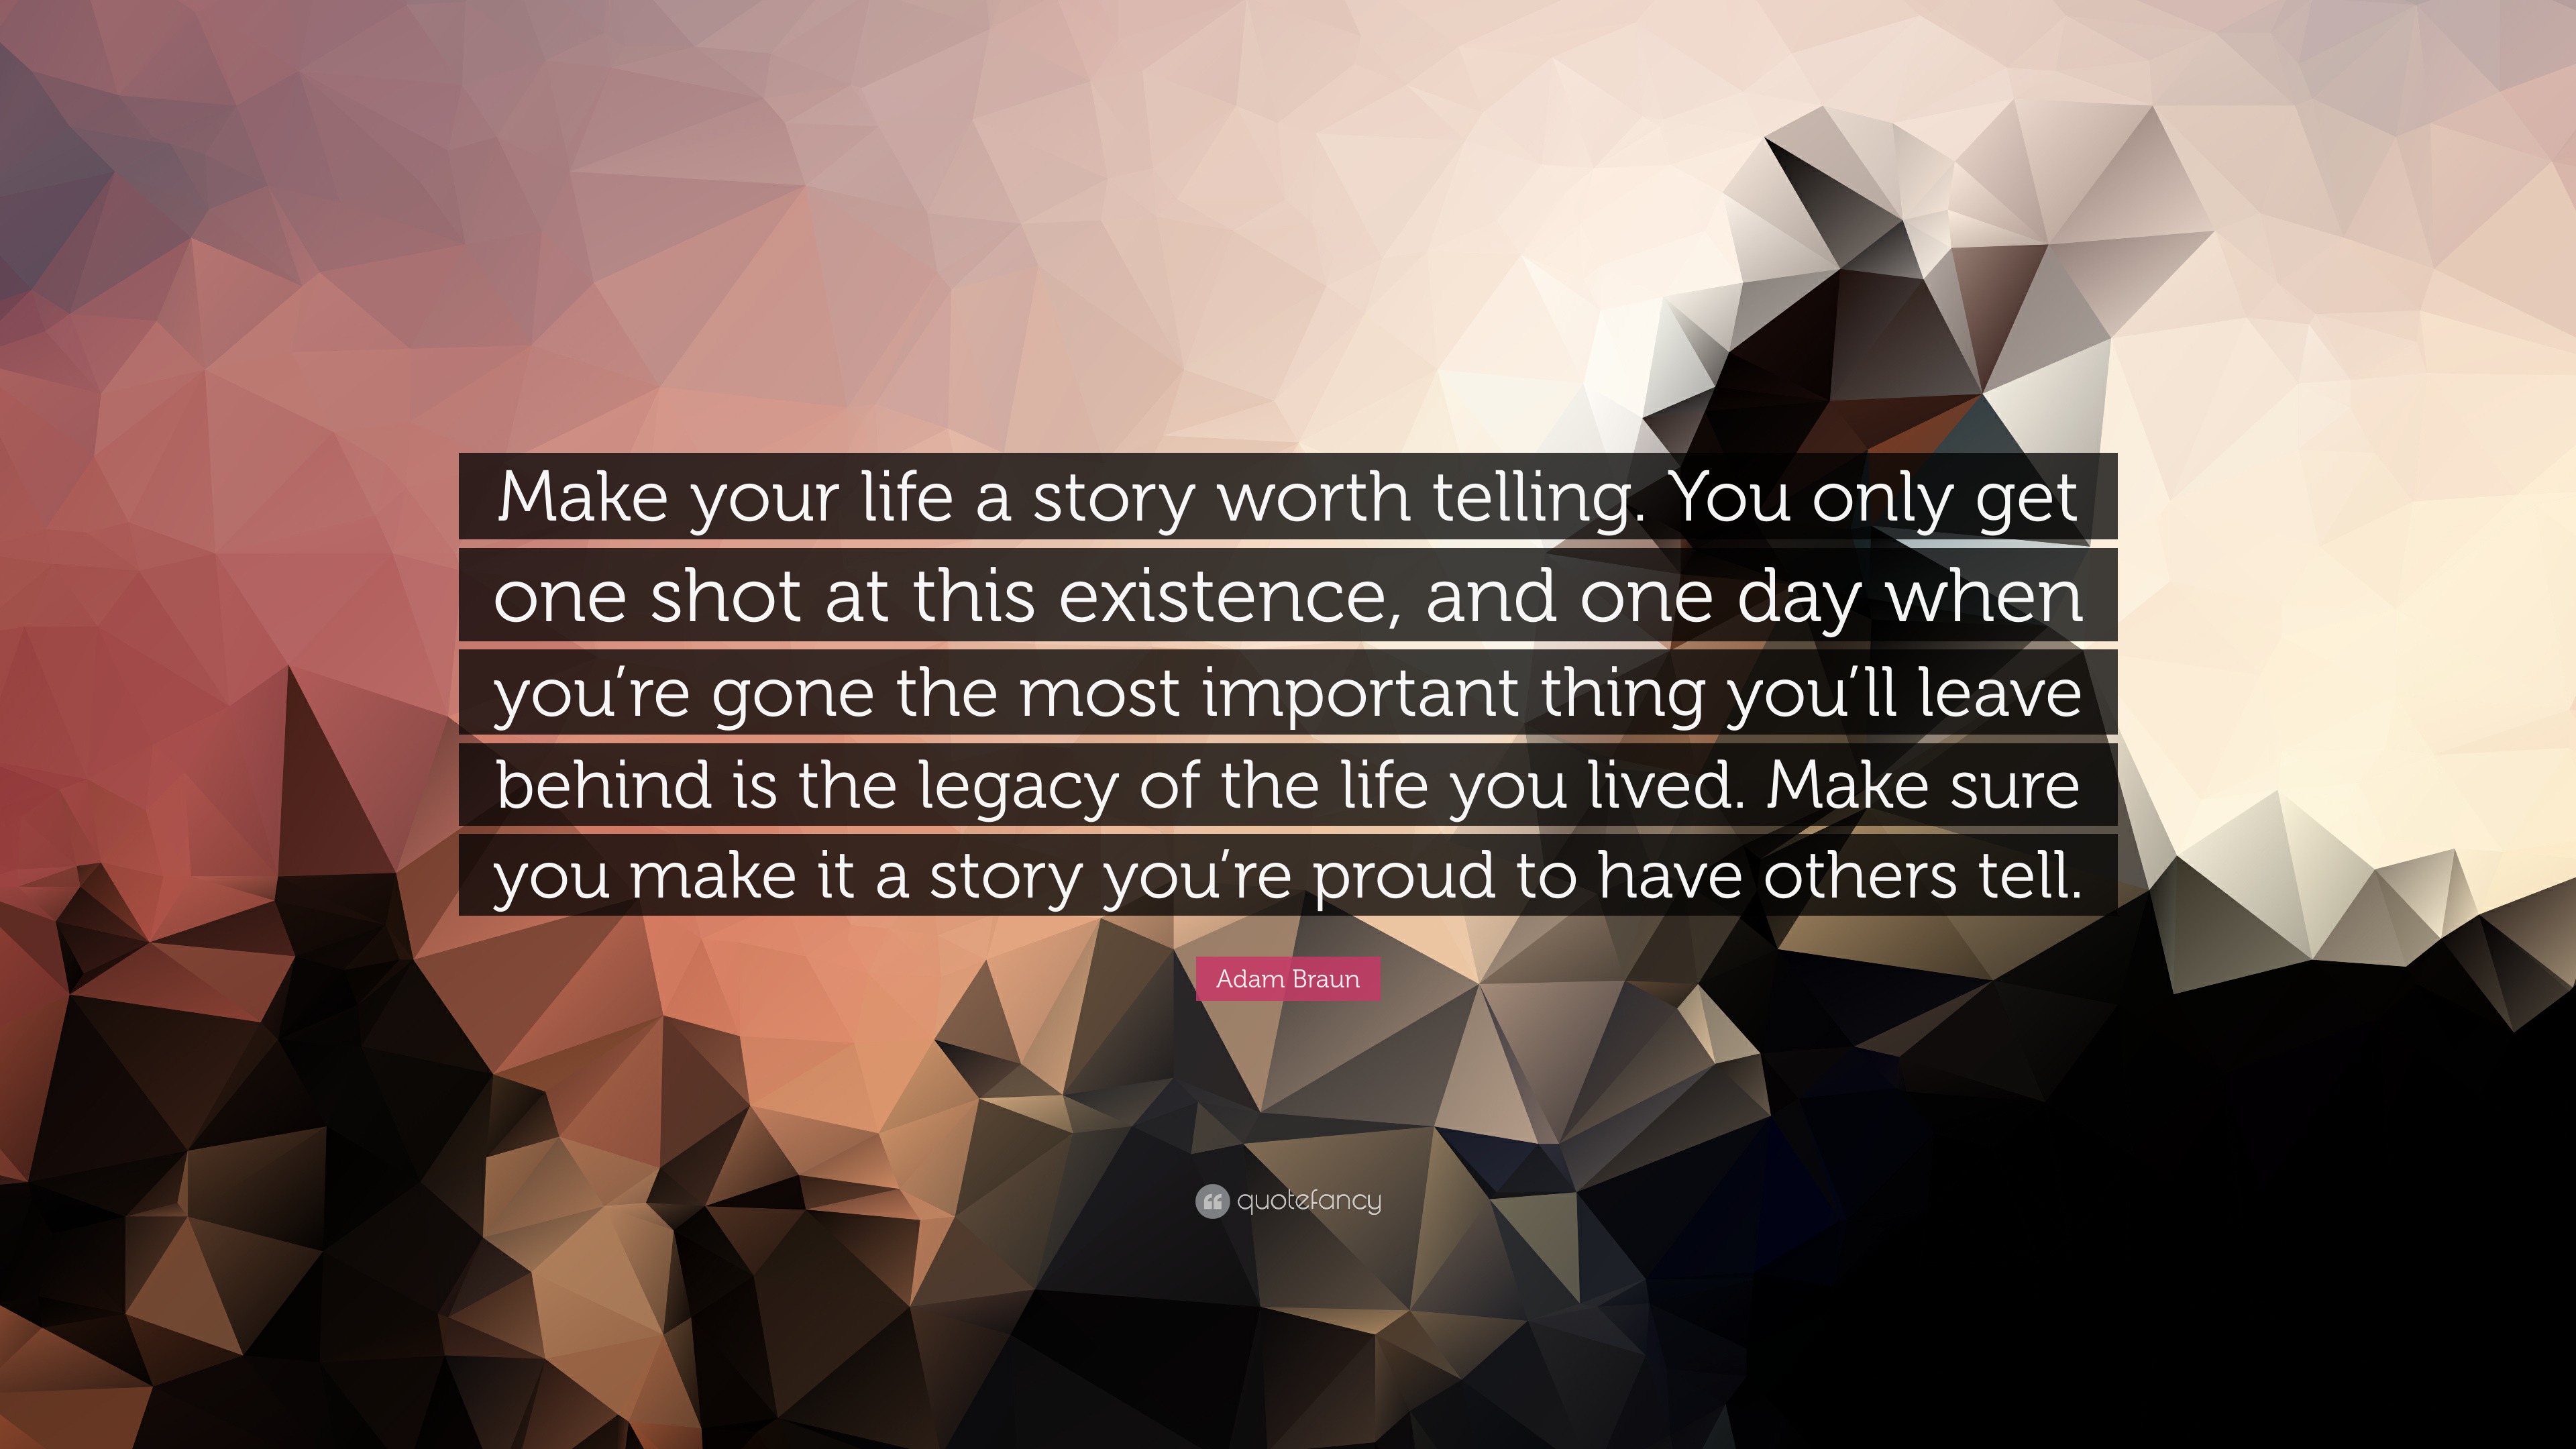 Adam Braun Quote “Make your life a story worth telling You only